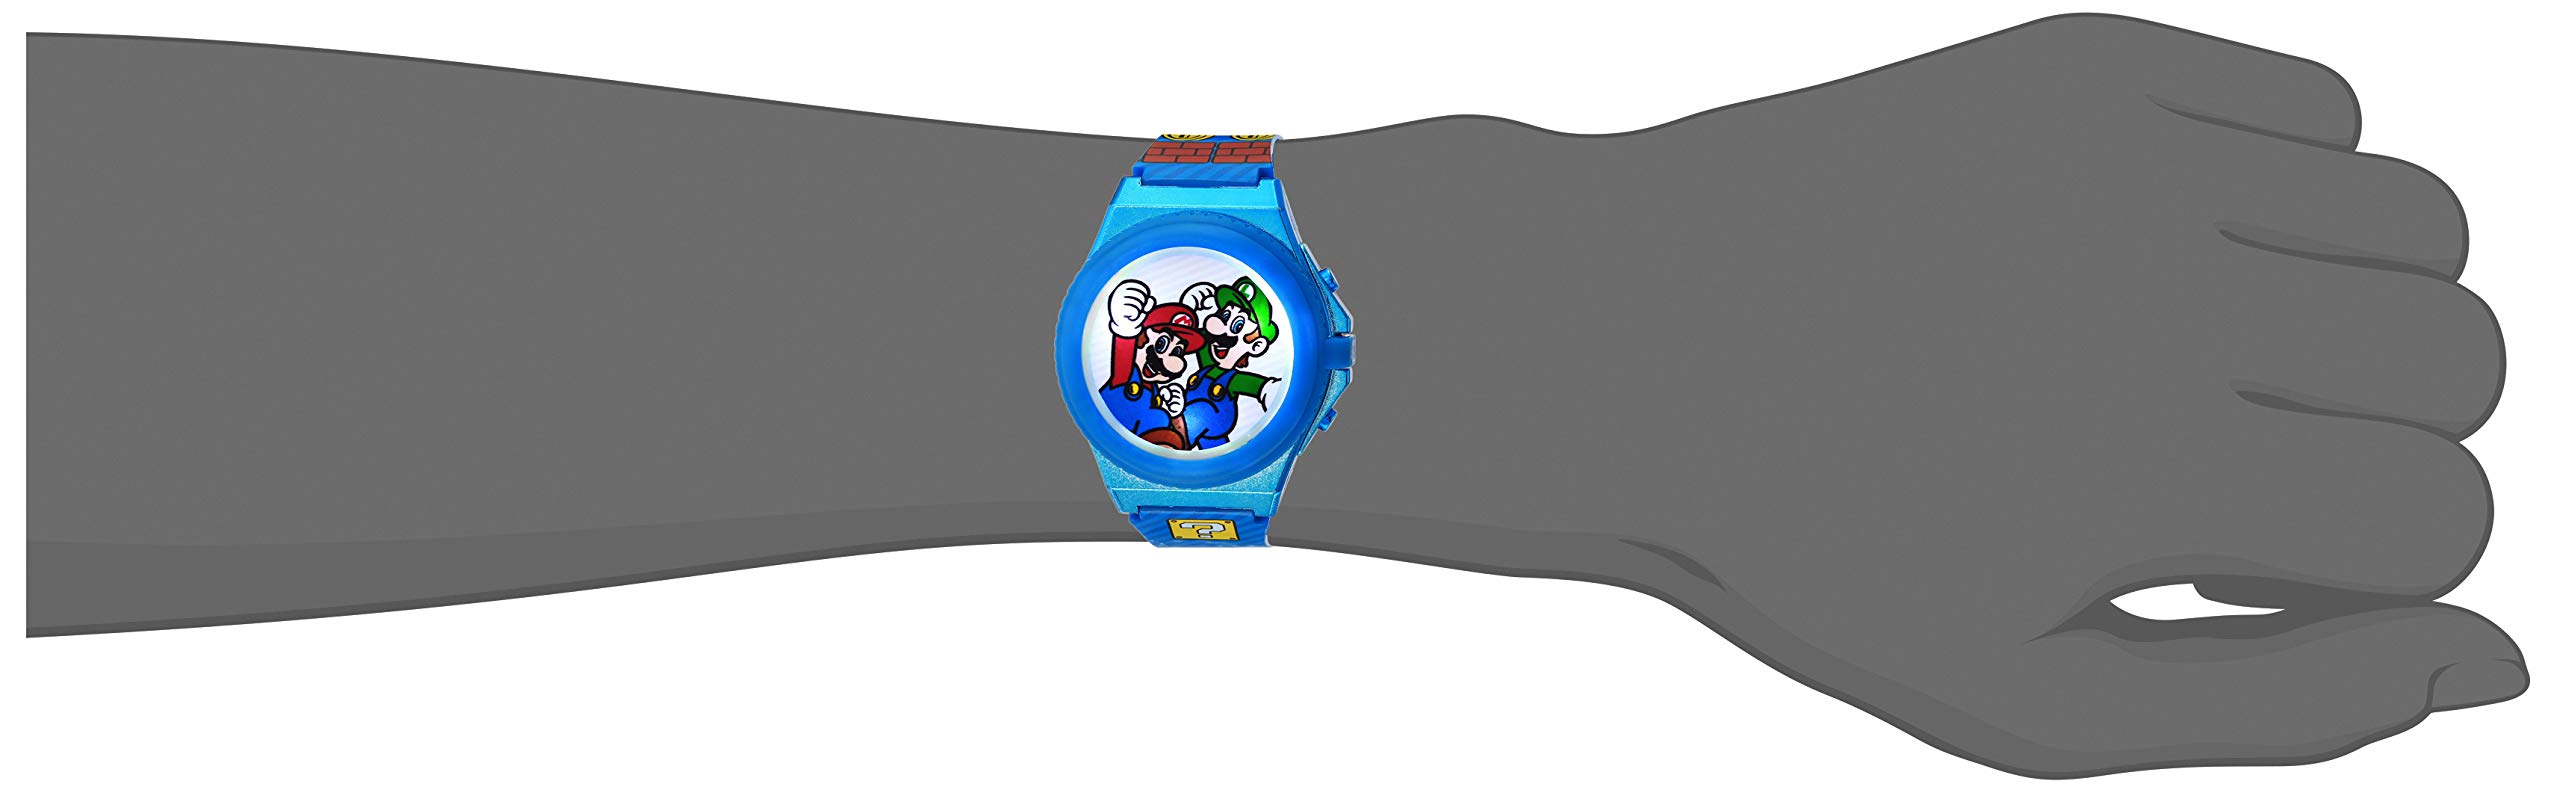 Accutime Kids Nintendo Super Mario Kart Luigi Bowser Digital LCD Quartz Wrist Watch, Cool Inexpensive Gift & Party Favor for Toddlers, Boys, Girls, Adults All Ages